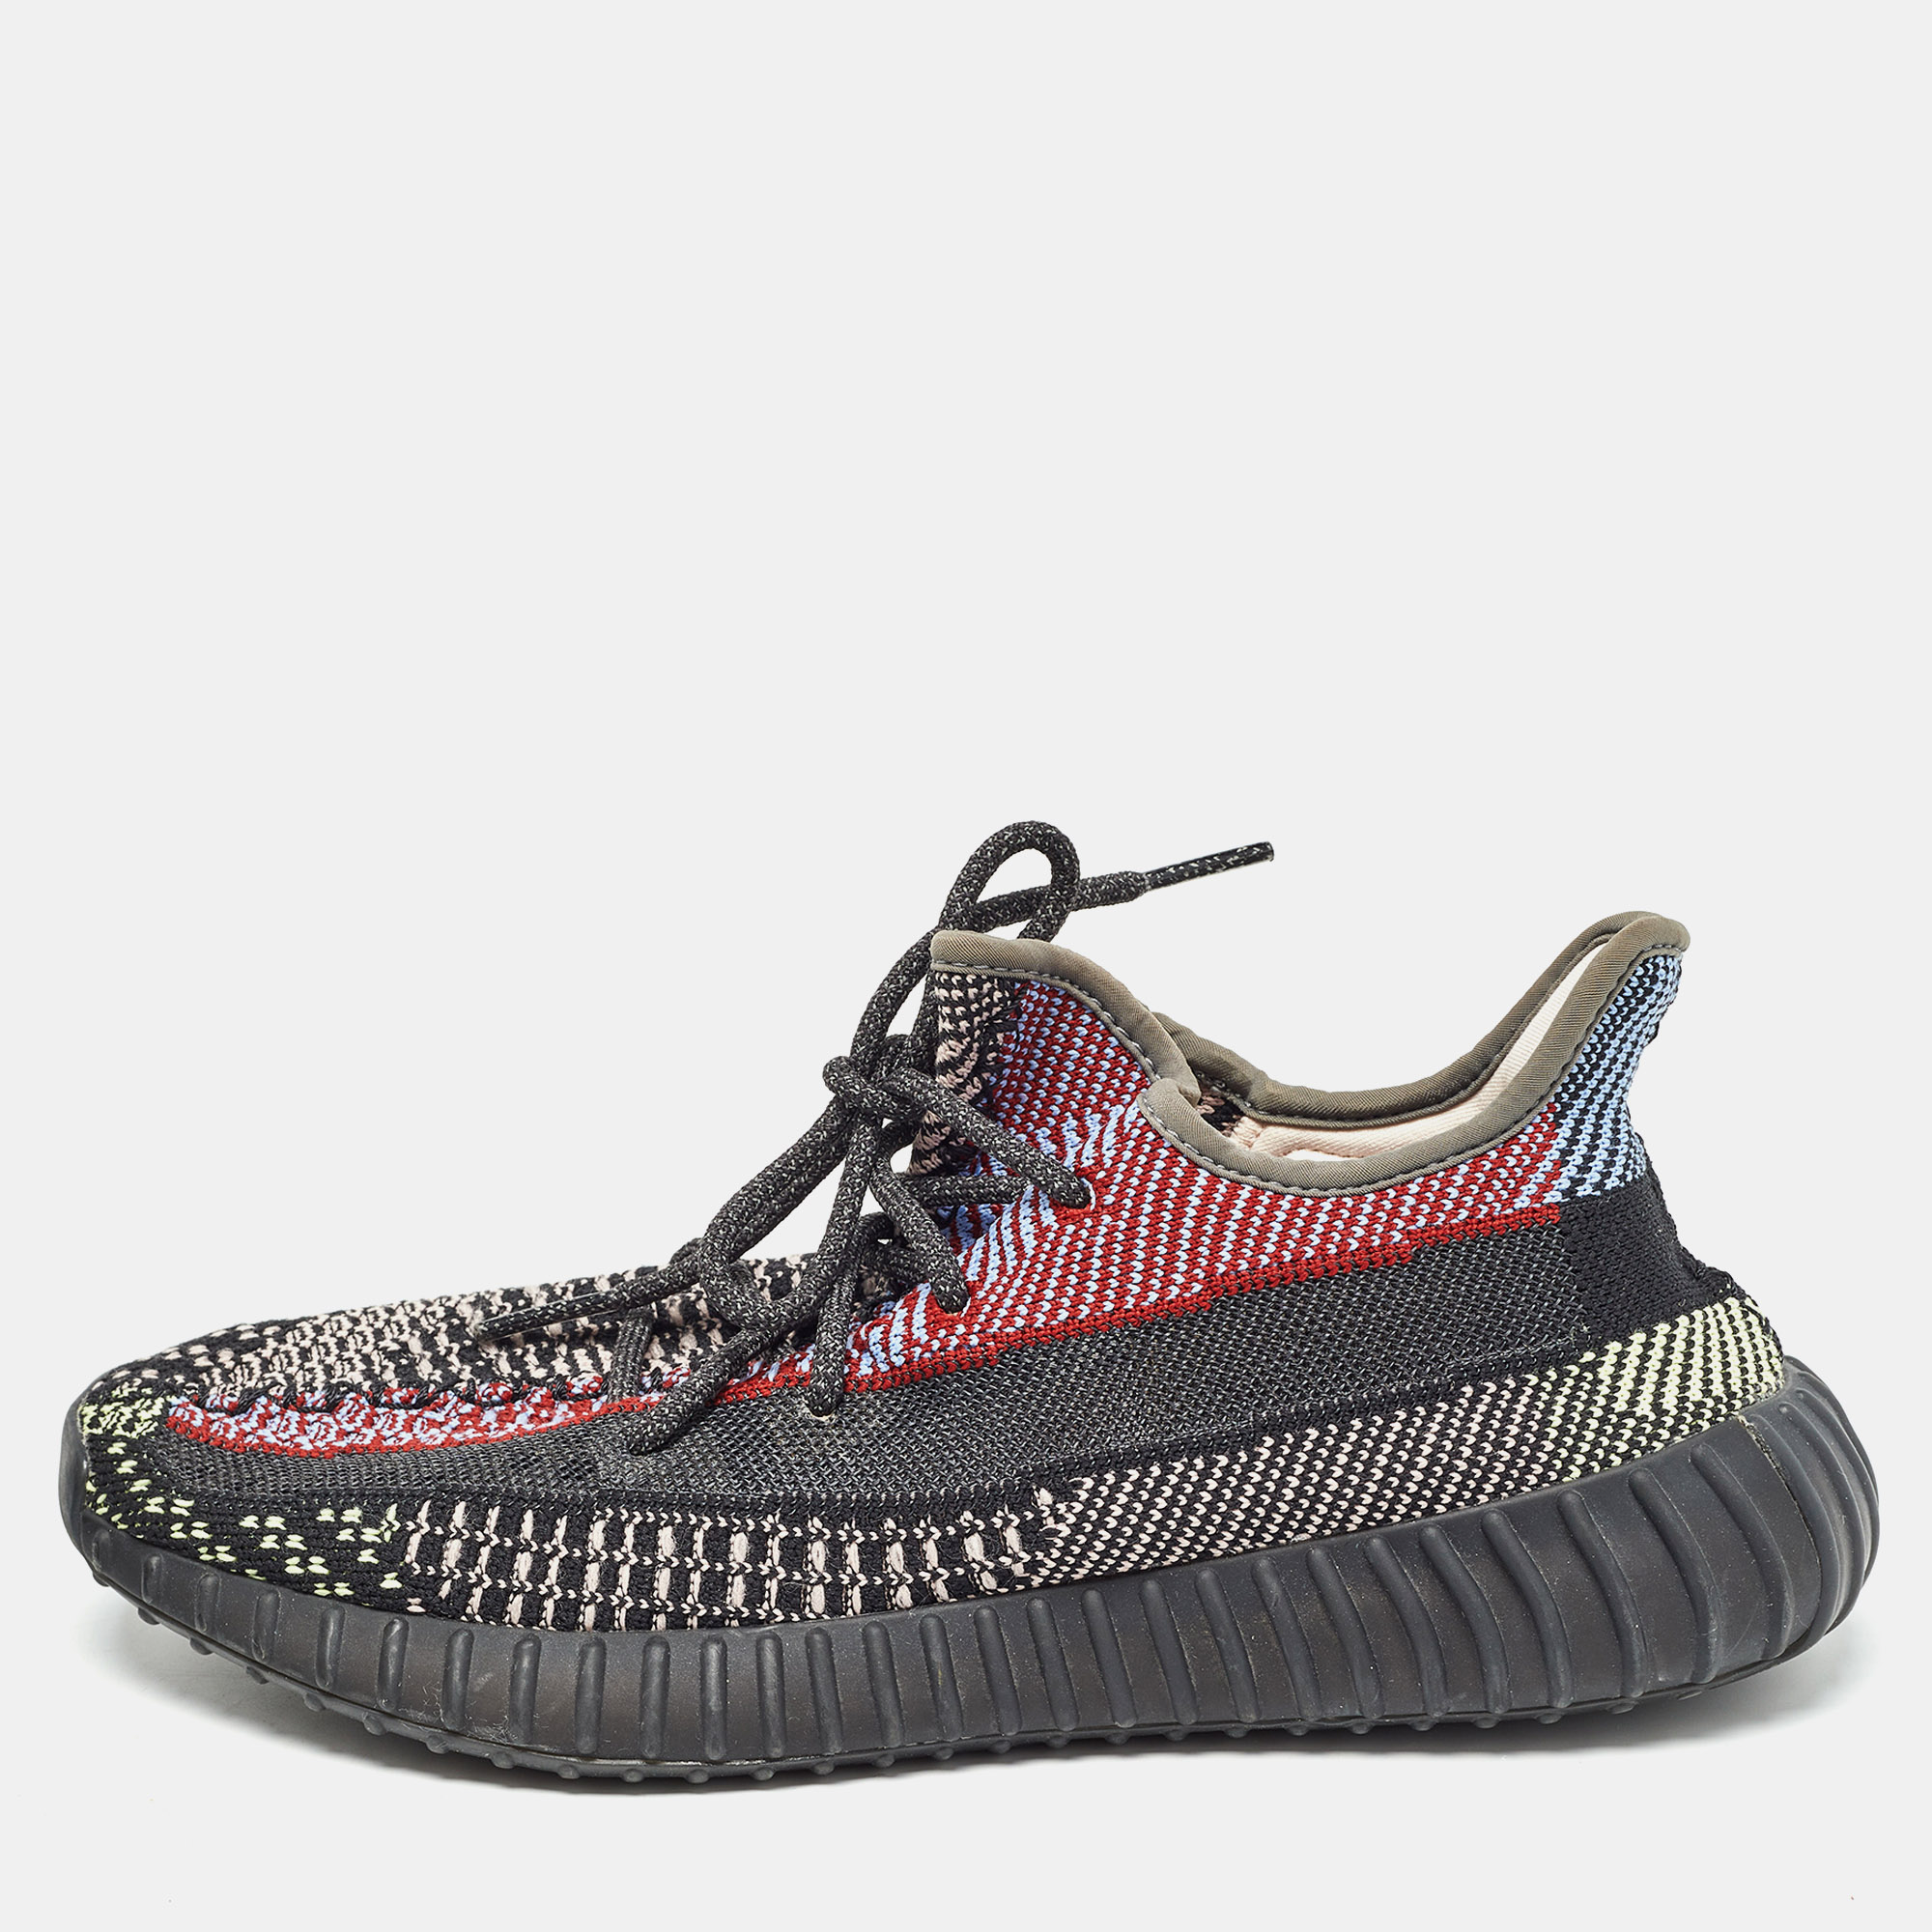 

Yeezy x Adidas Multicolor Knit Fabric Boost 350 V2 Yecheil (Non-Reflective) Sneakers Size 43 1/3